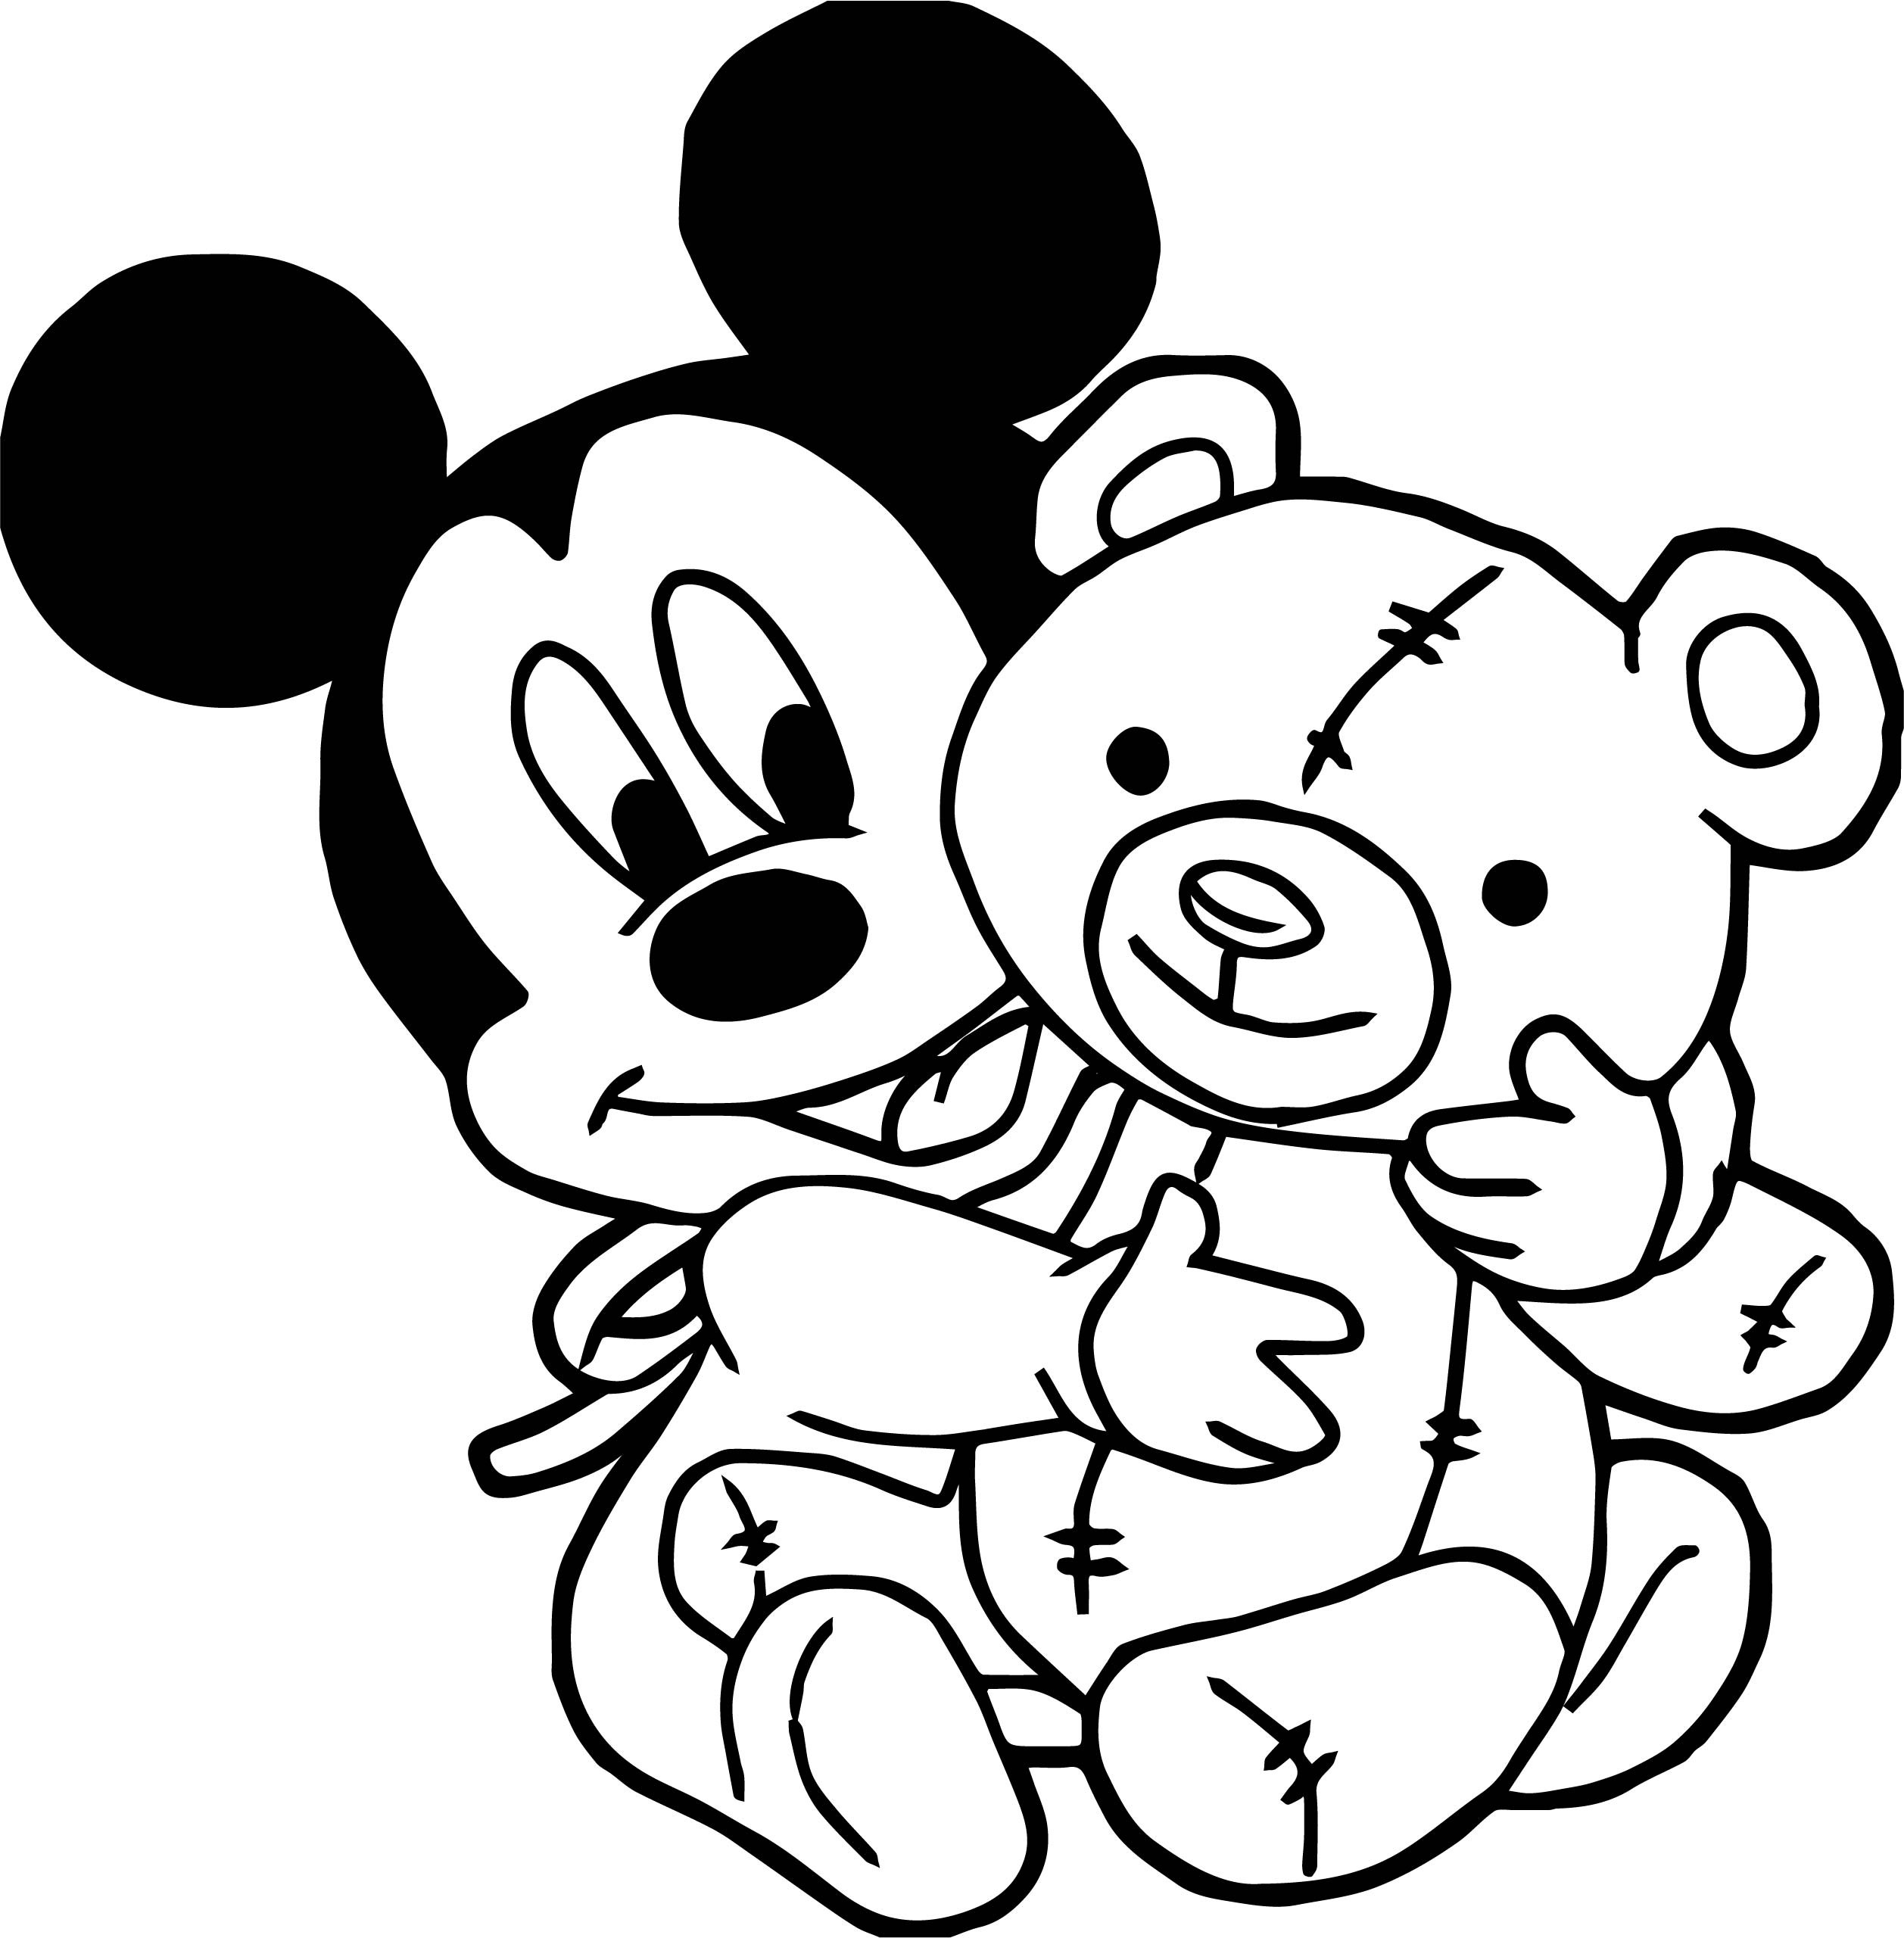 baby-mickey-coloring-page-mickeymouse-mickey-mouse-drawings-mickey-check-this-cute-baby-mickey